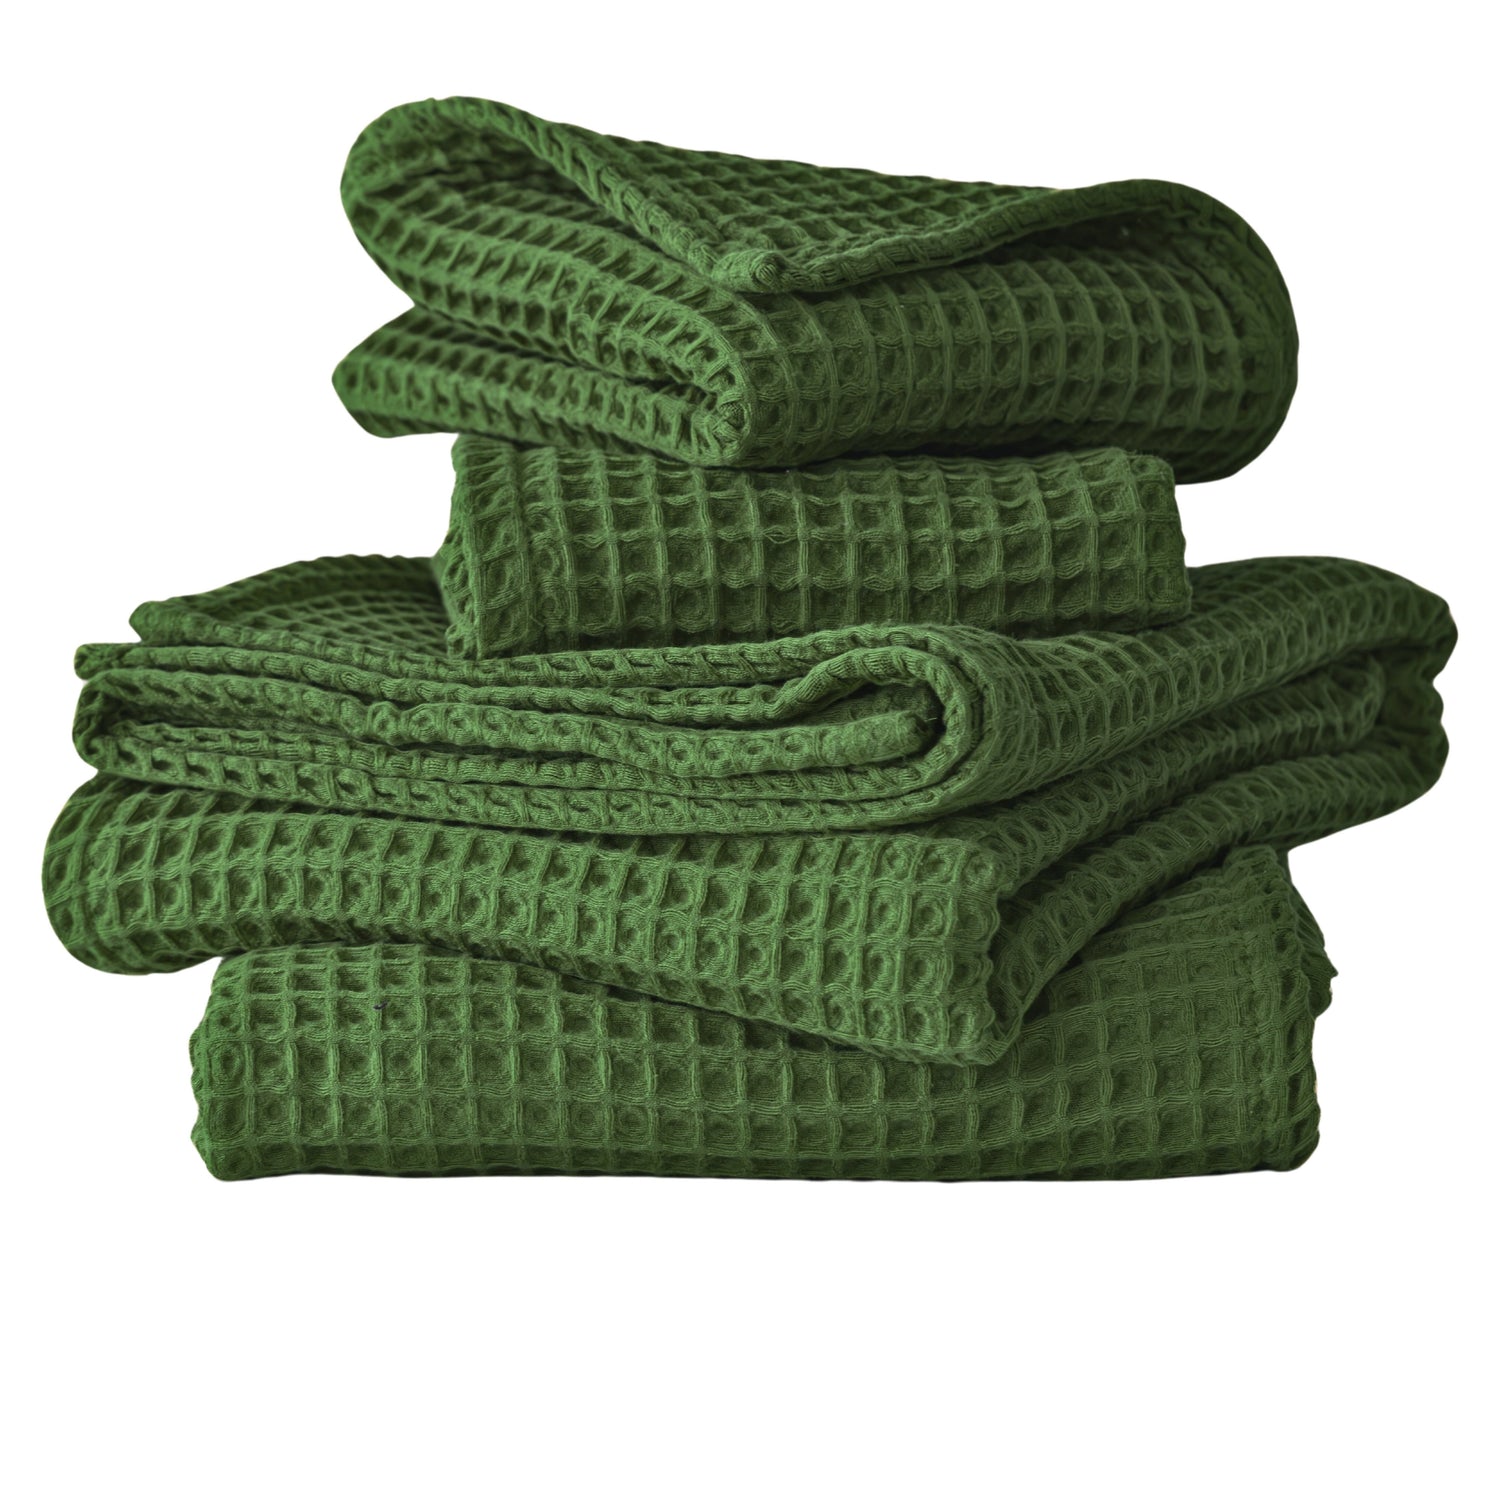 Wholesale Solid Color Waffle Towels Sets for Bathroom. Bulk Waffle Weave Towels in USA, US, UK, Amazon, Etsy.